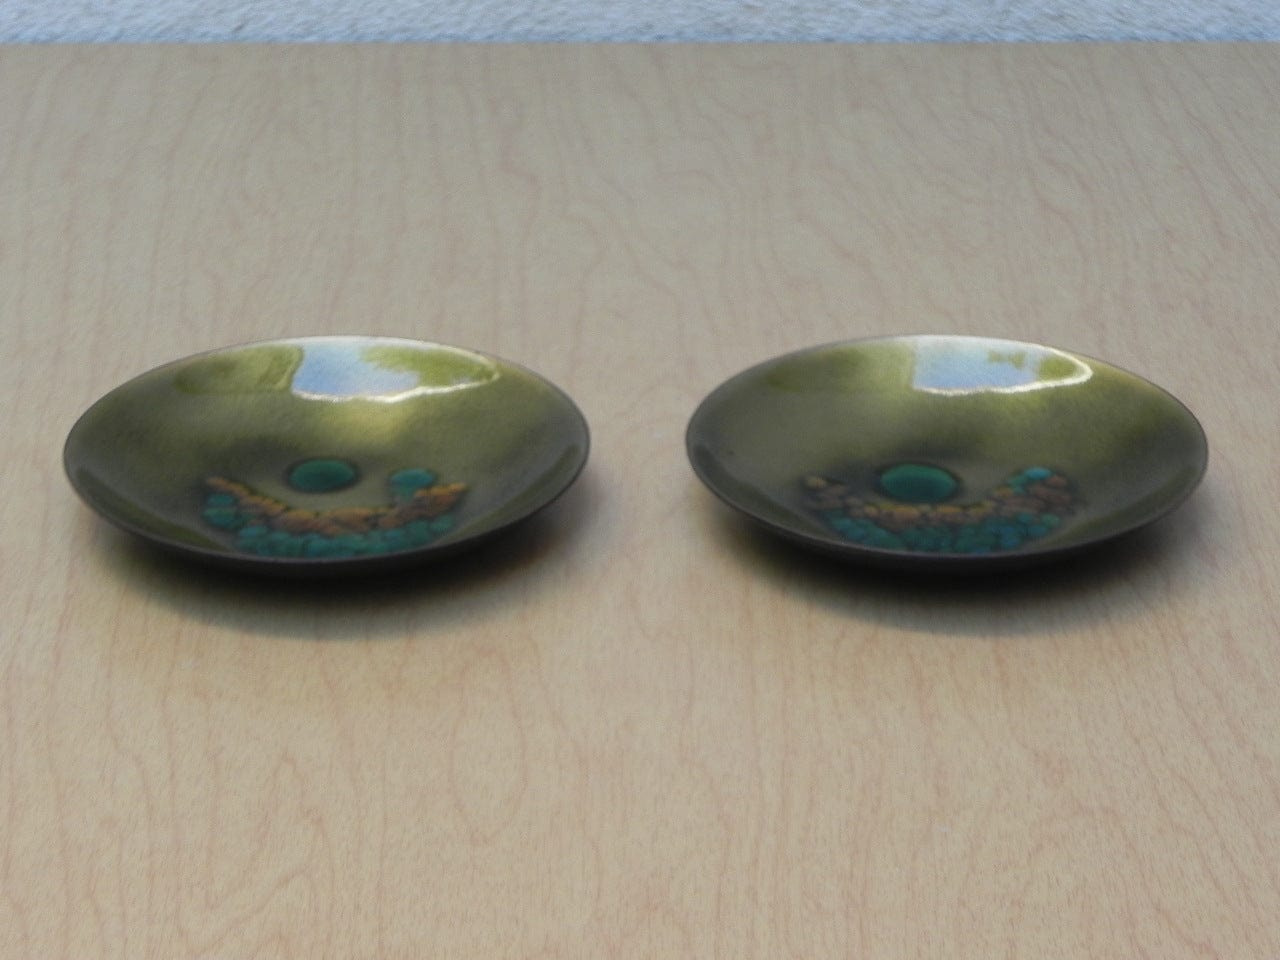 I Like Mike's Mid Century Modern Accessories Vintage Bovano Pair Small Round Green Plates